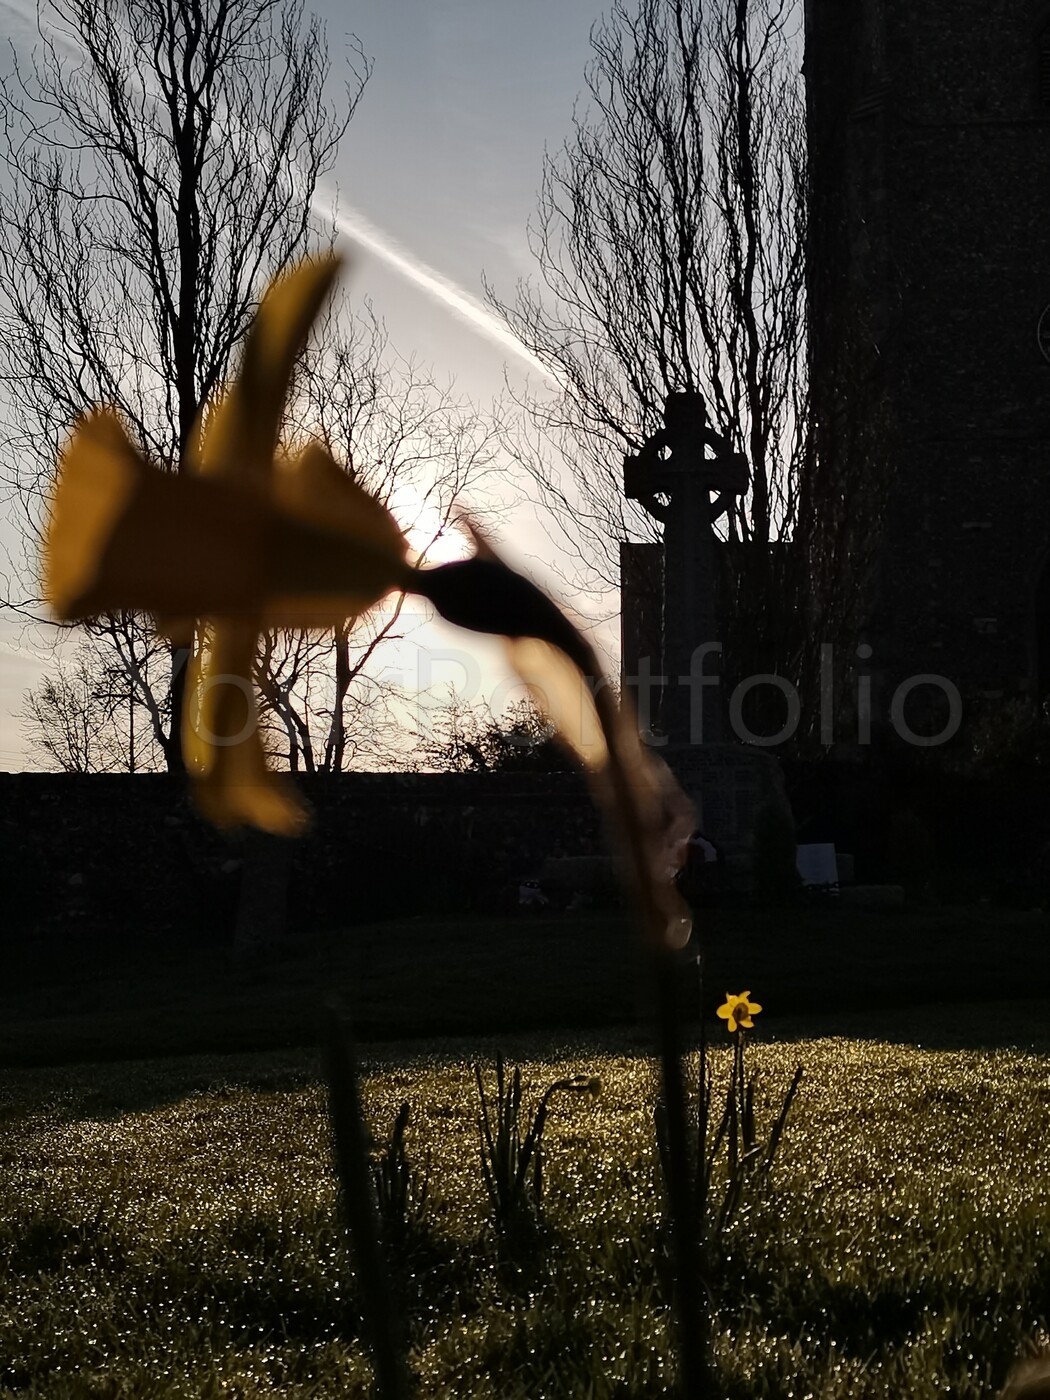 photographer KentTog outdoors  photo. catching the first rays in the churchyard .